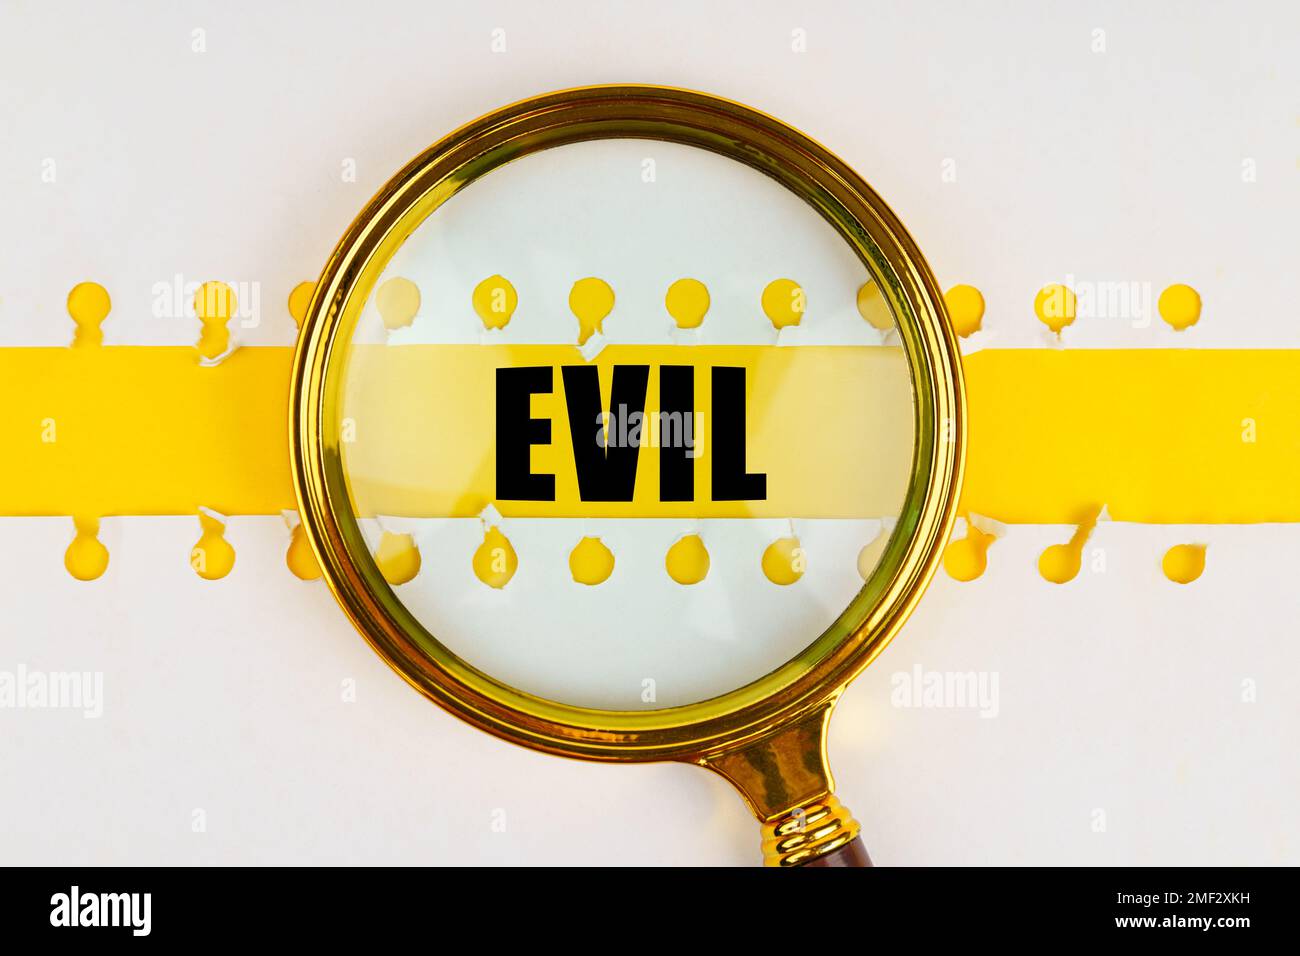 Between two sheets from a notebook on a yellow strip with the inscription - evil, there is a magnifying glass. Stock Photo